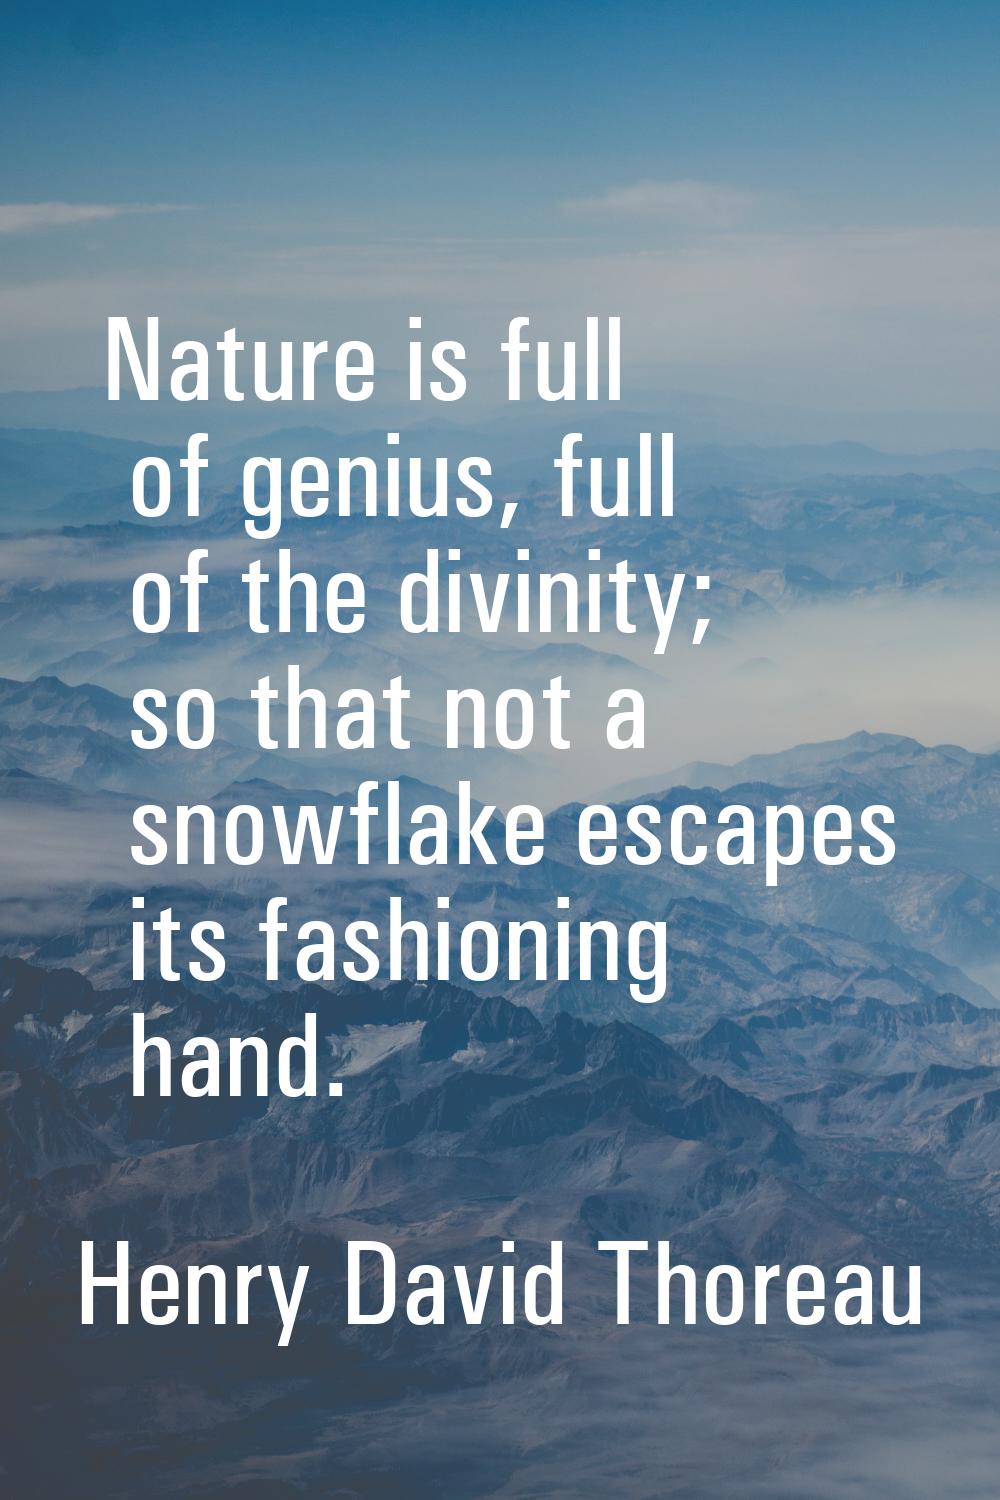 Nature is full of genius, full of the divinity; so that not a snowflake escapes its fashioning hand